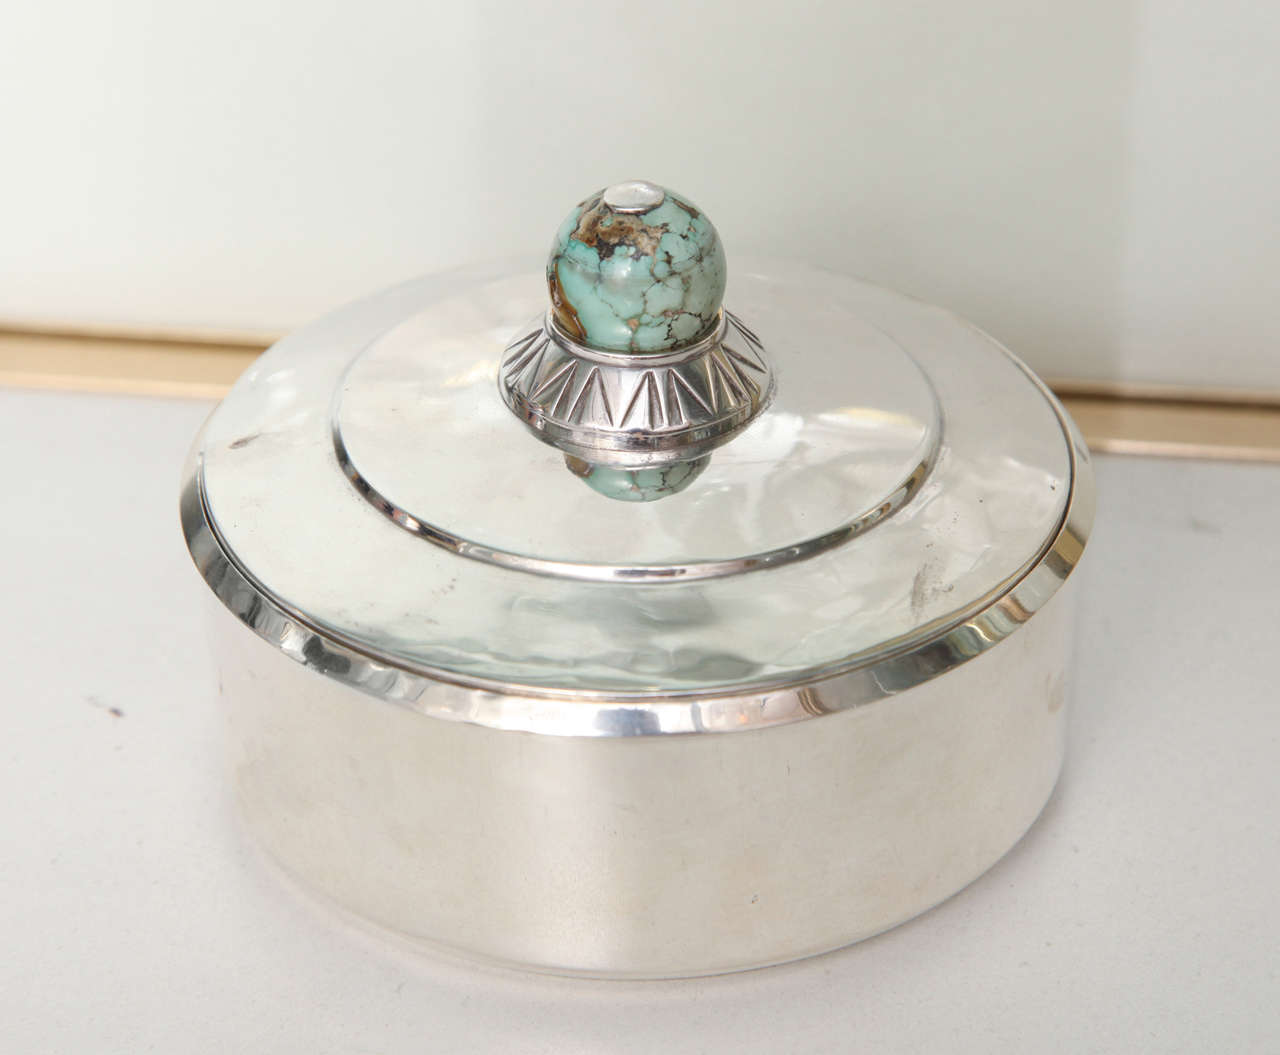 PUIFORCAT Jean Emile (1897-1945)
A French Silver and turquoise box, originally retailed by the Grogan Company
Signed Jean E. Puiforcat, Grogan Company Pittsburg Sterling France. Height: 3.5 in,  Diameter: 4.1 in
Weight: 237 g
.